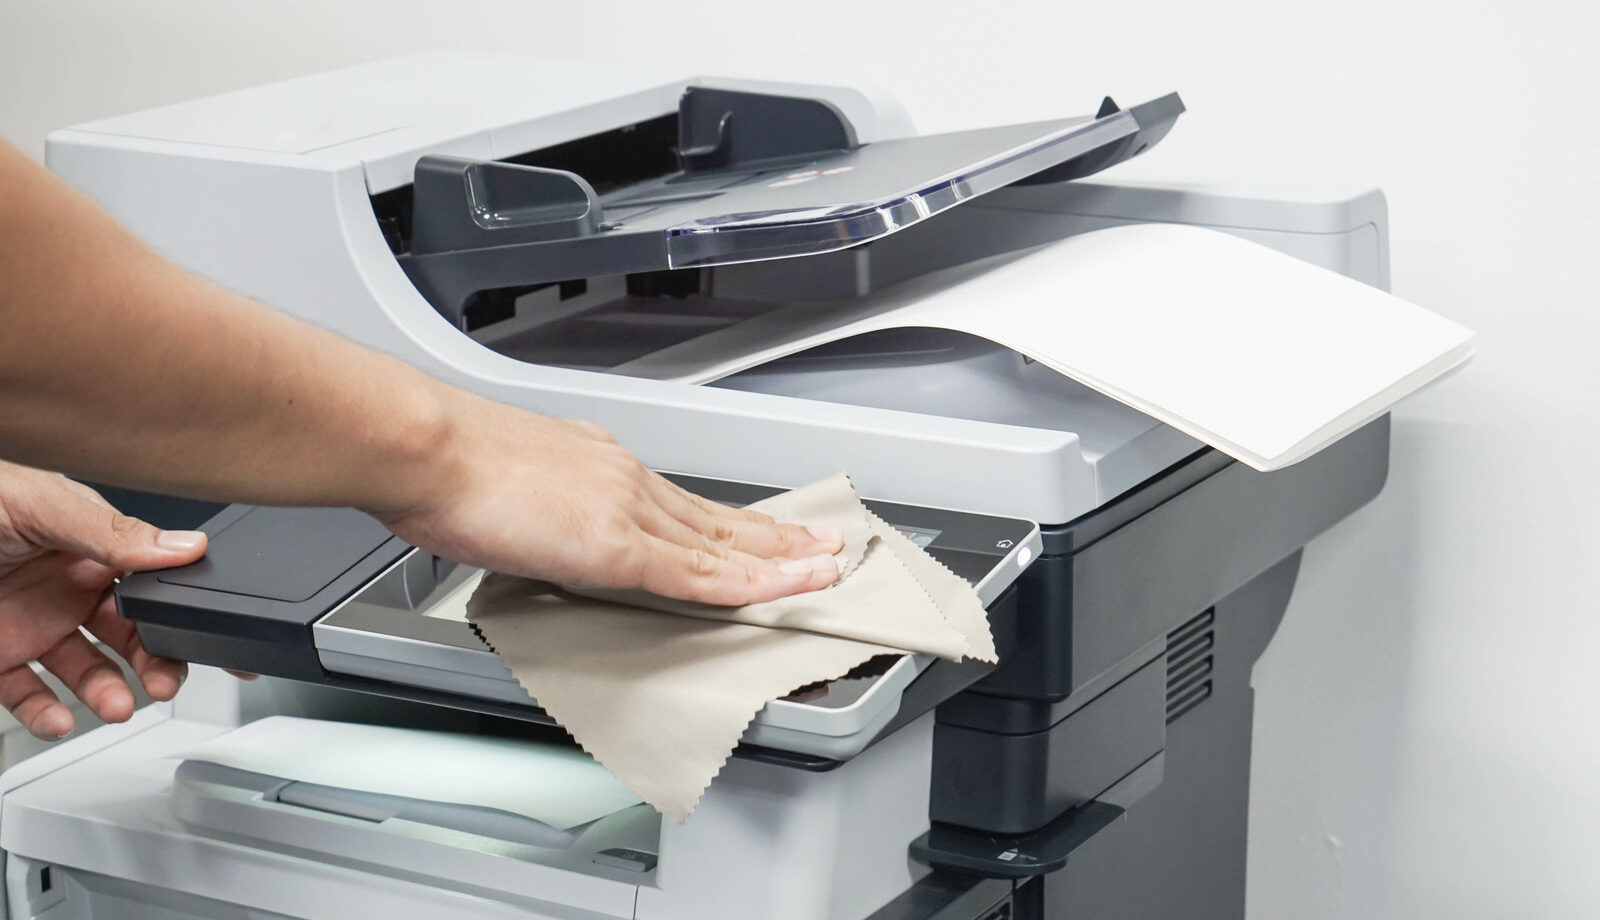 Tips on How To Clean Printers Mindfully